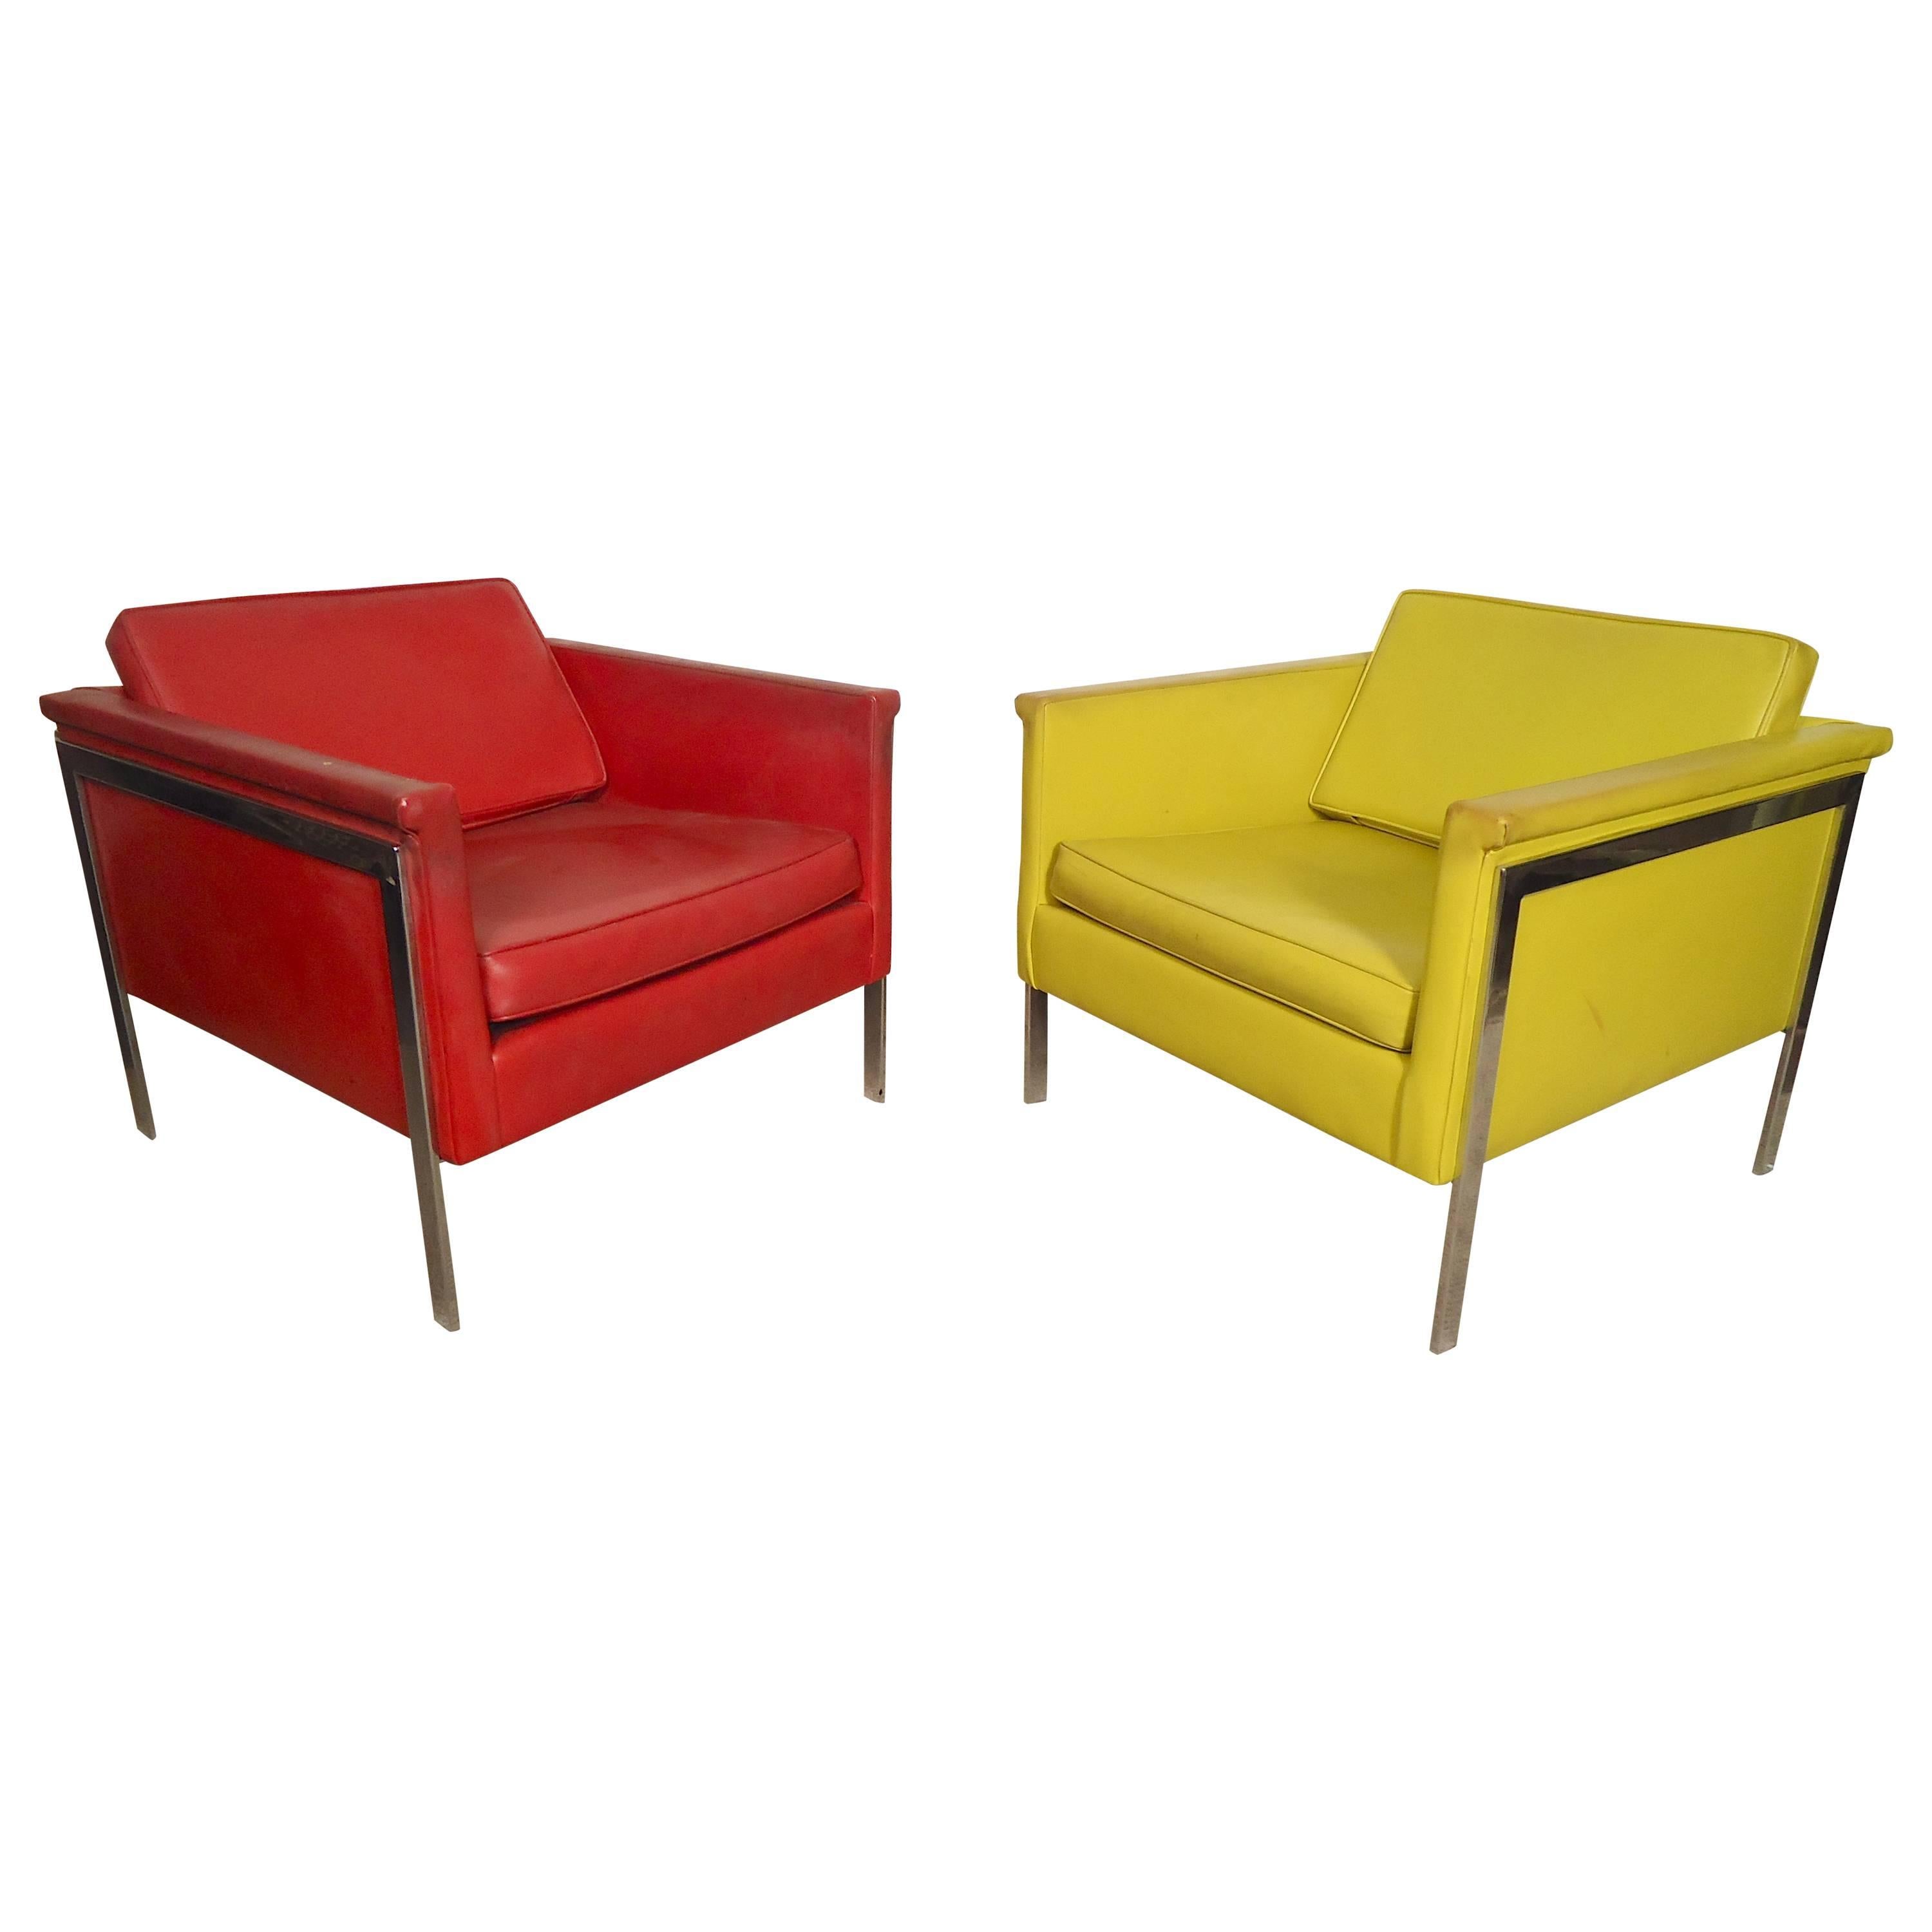 Pair Mid-Century Modern Lounge Chairs, Yellow and Red